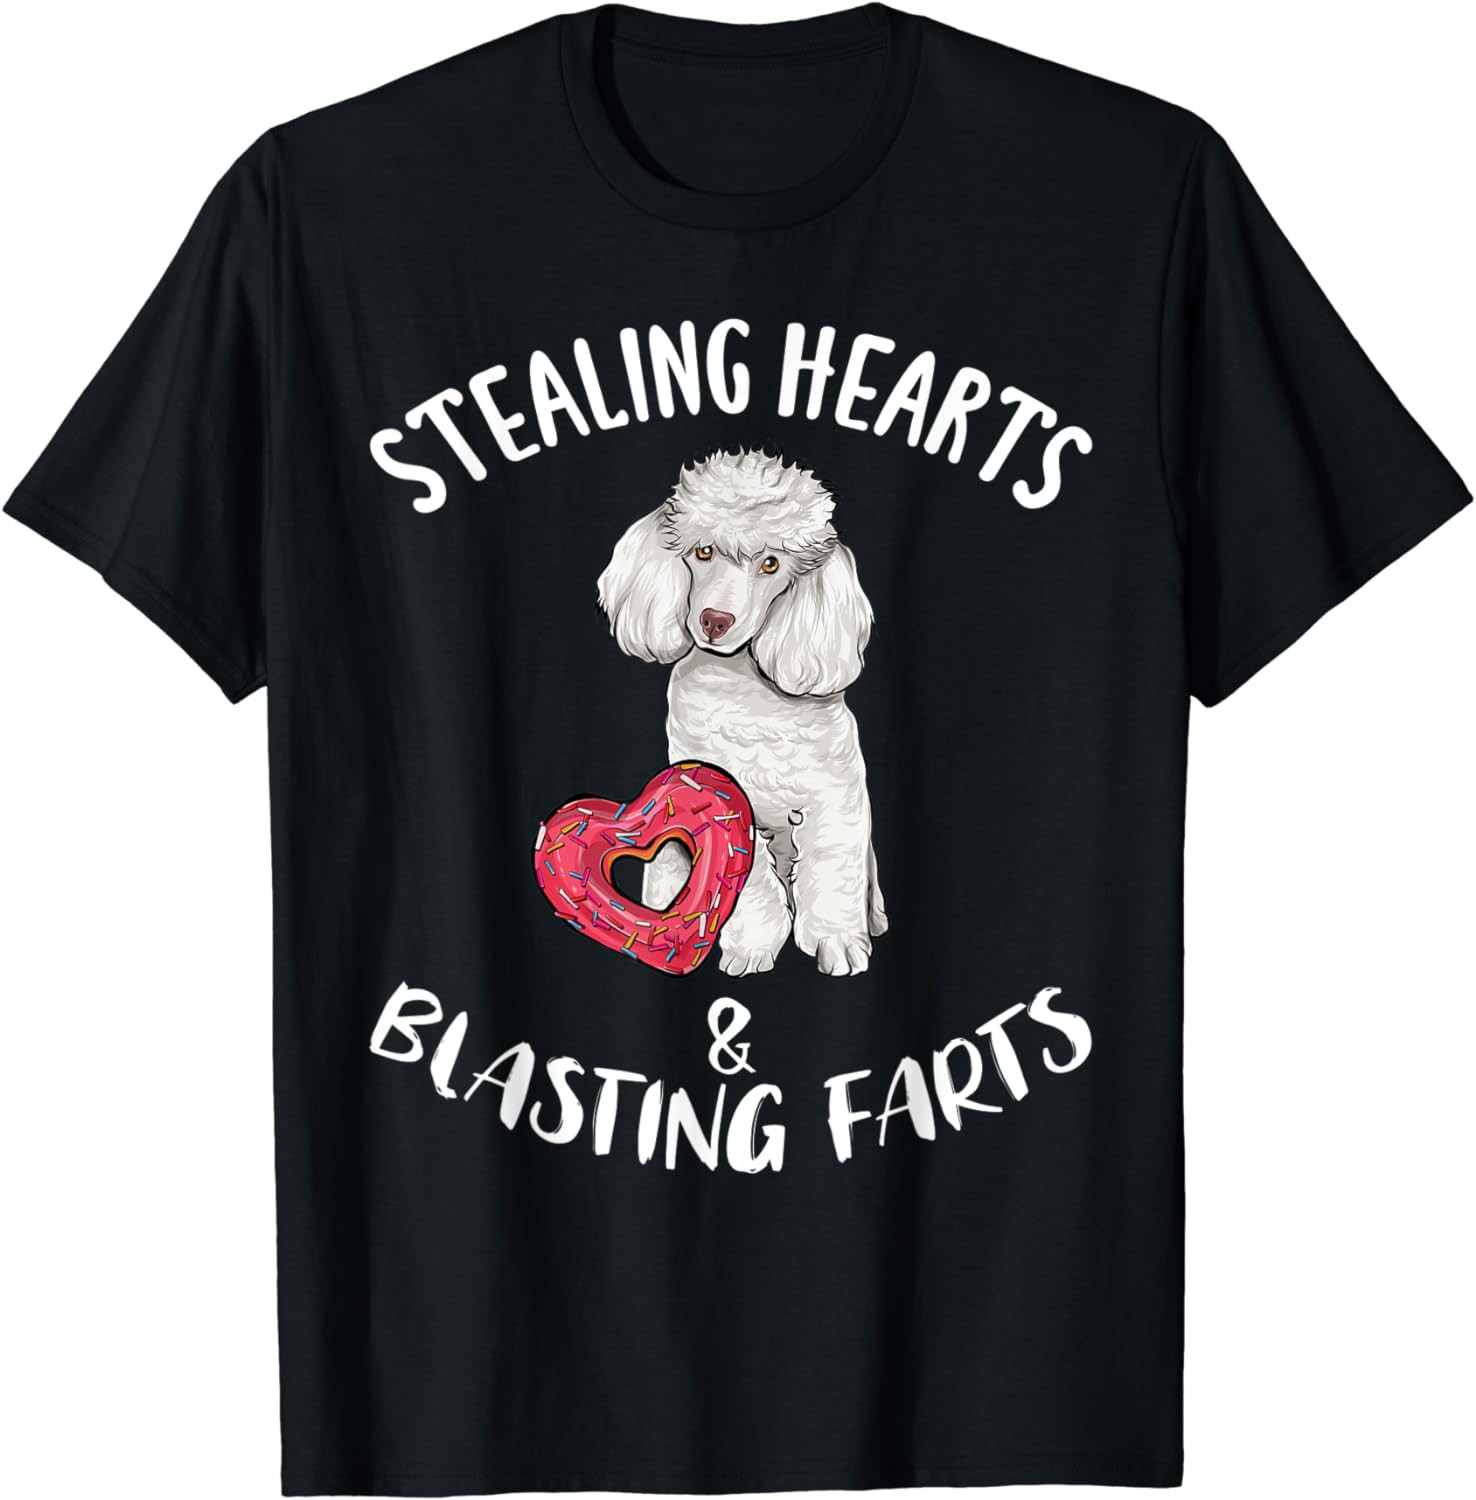 Stealing Hearts Blasting Farts Poodle Valentines Day T-Shirt